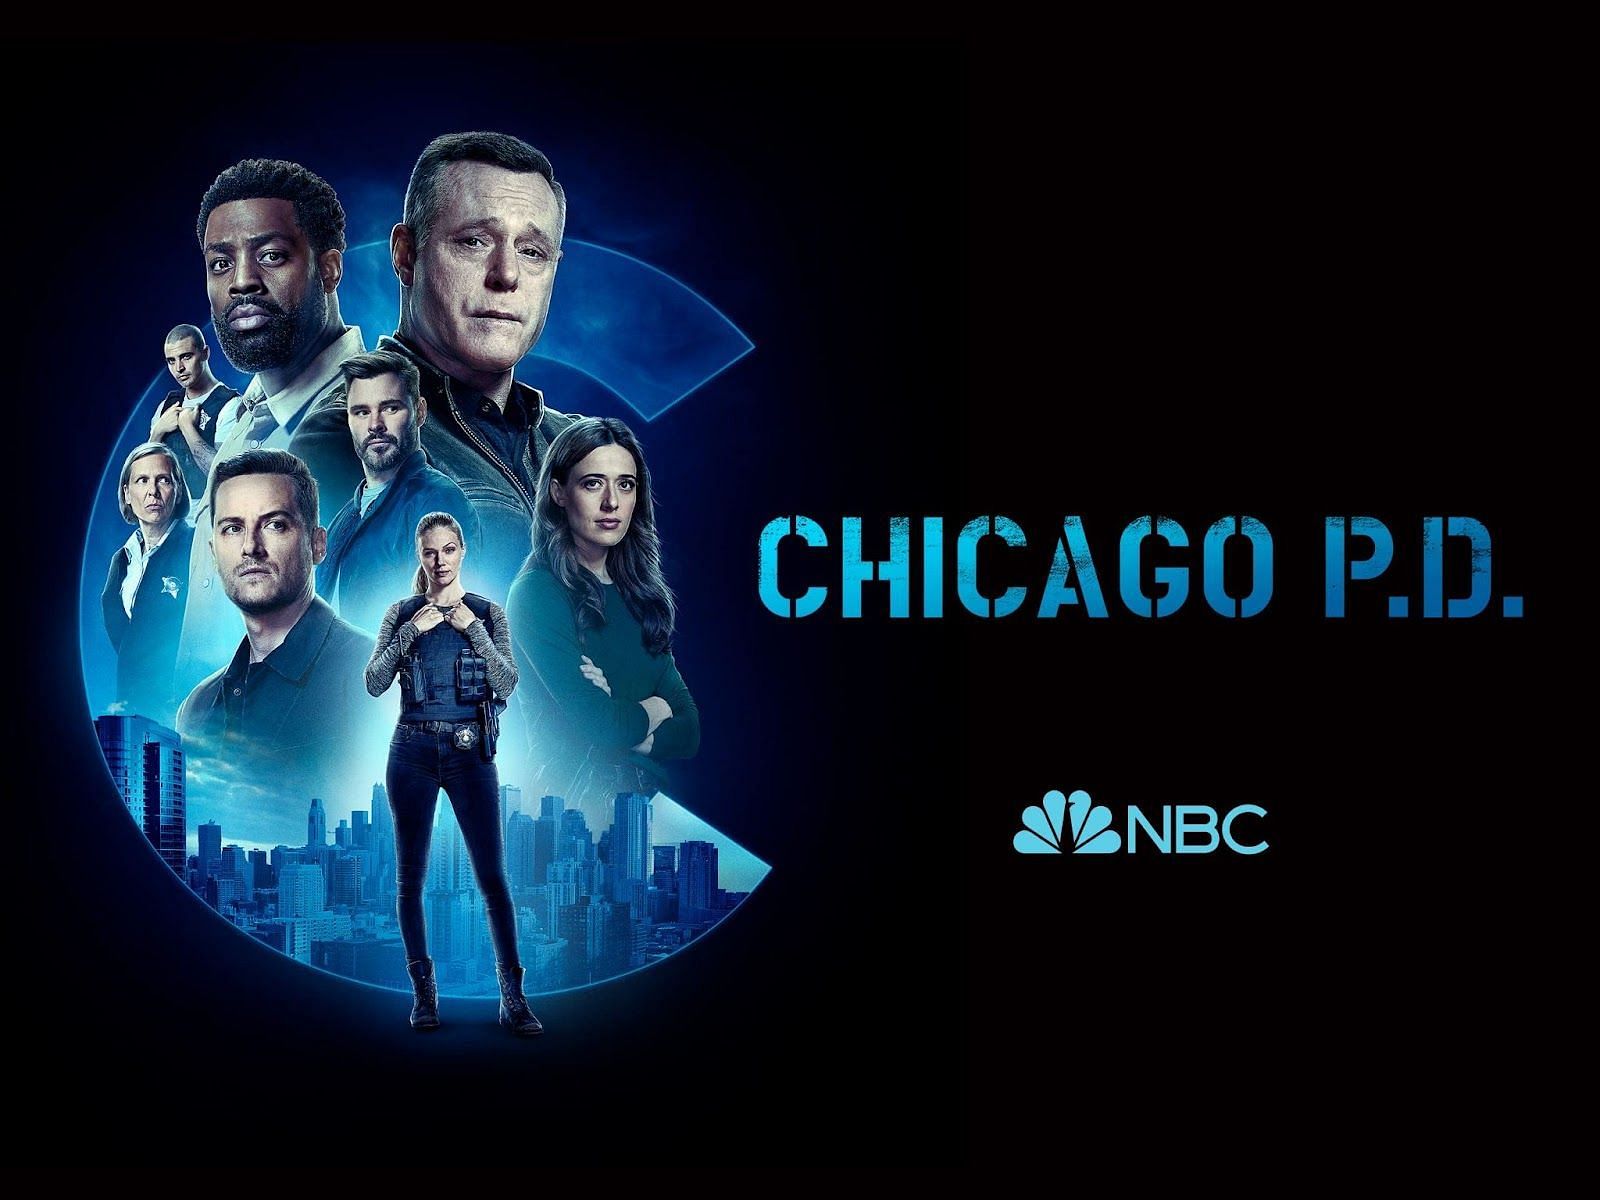 How many seasons of Chicago PD are there?